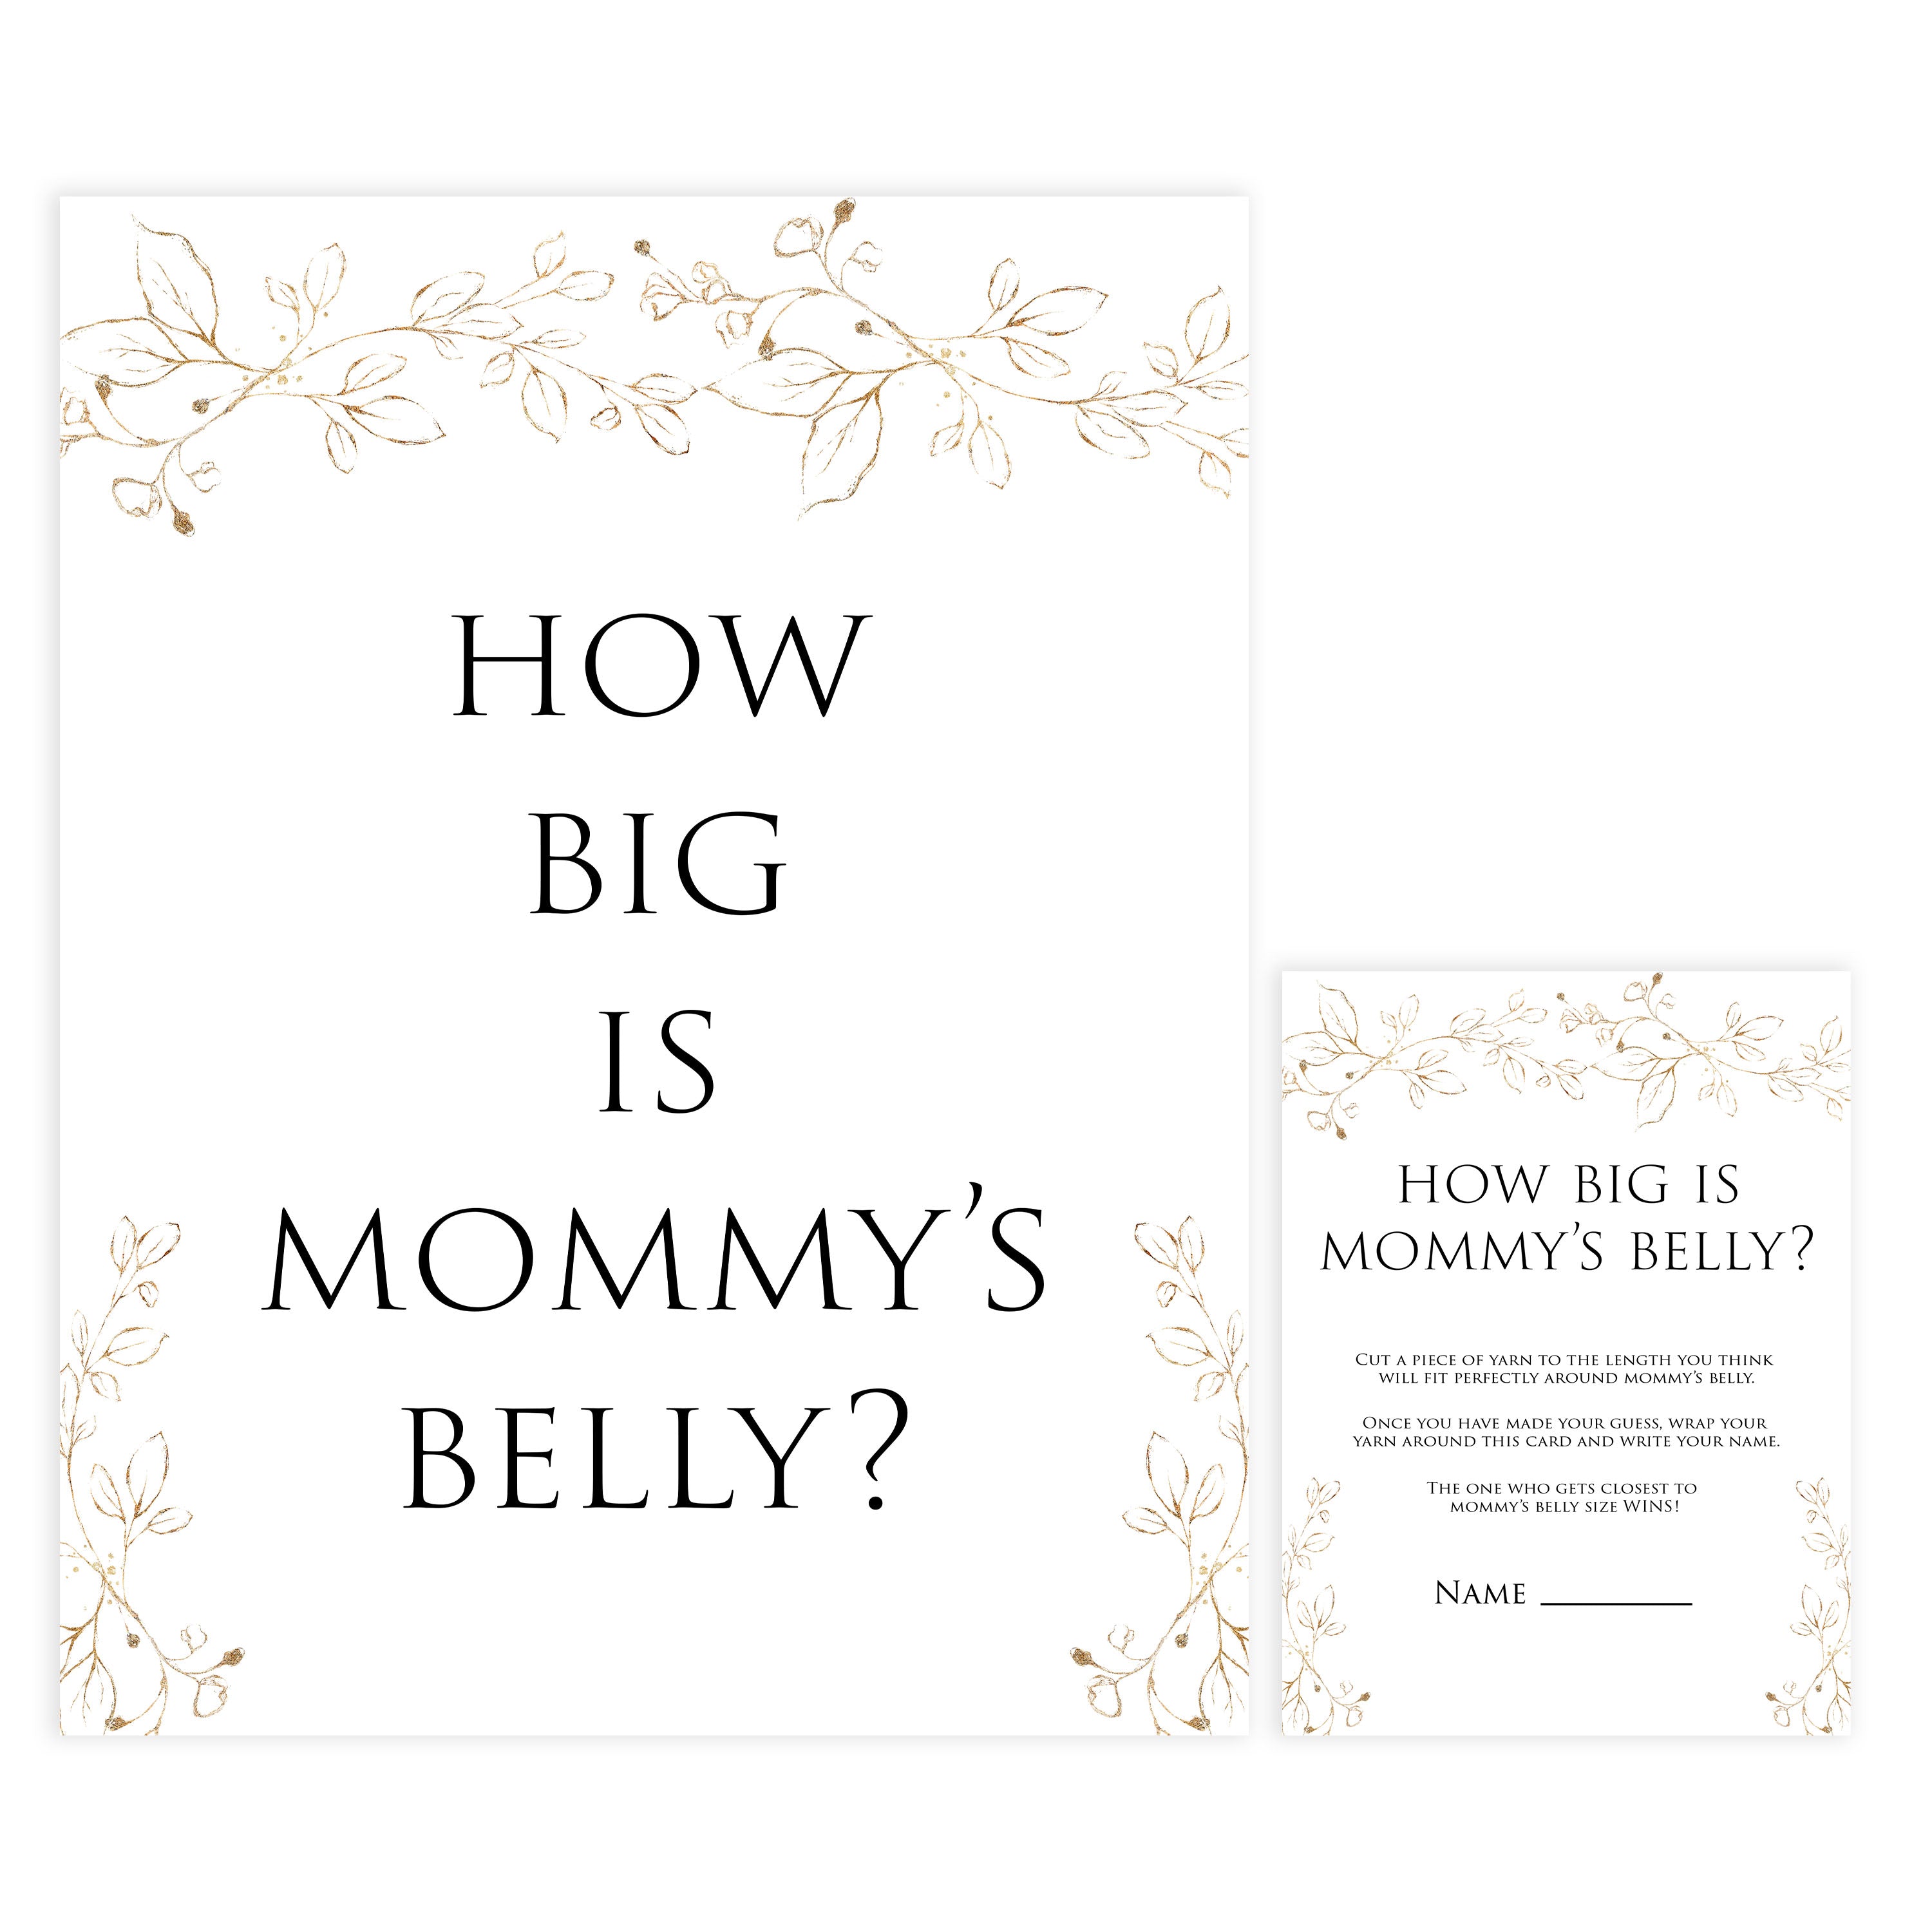 how big is mommys belly game, Printable baby shower games, gold leaf baby games, baby shower games, fun baby shower ideas, top baby shower ideas, gold leaf baby shower, baby shower games, fun gold leaf baby shower ideas